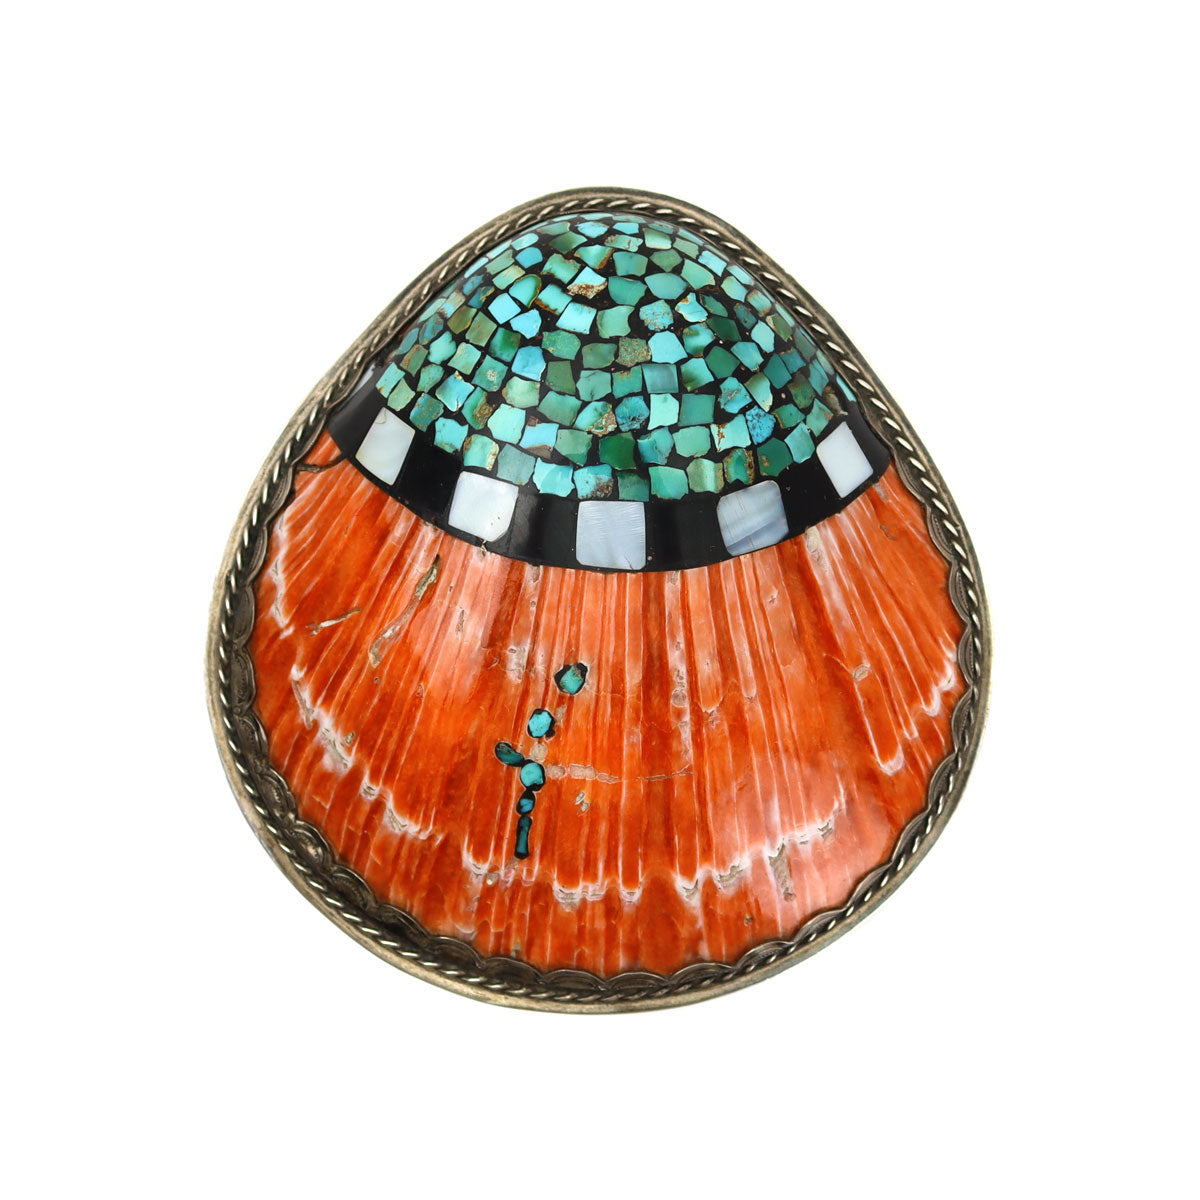 Santo Domingo (Kewa) Spiny Oyster Shell with Multi-Stone Inlay and Silver Lidded Box c. 1940-50s, 3.25" x 4.5" x 4.125" (J14924-043) 2